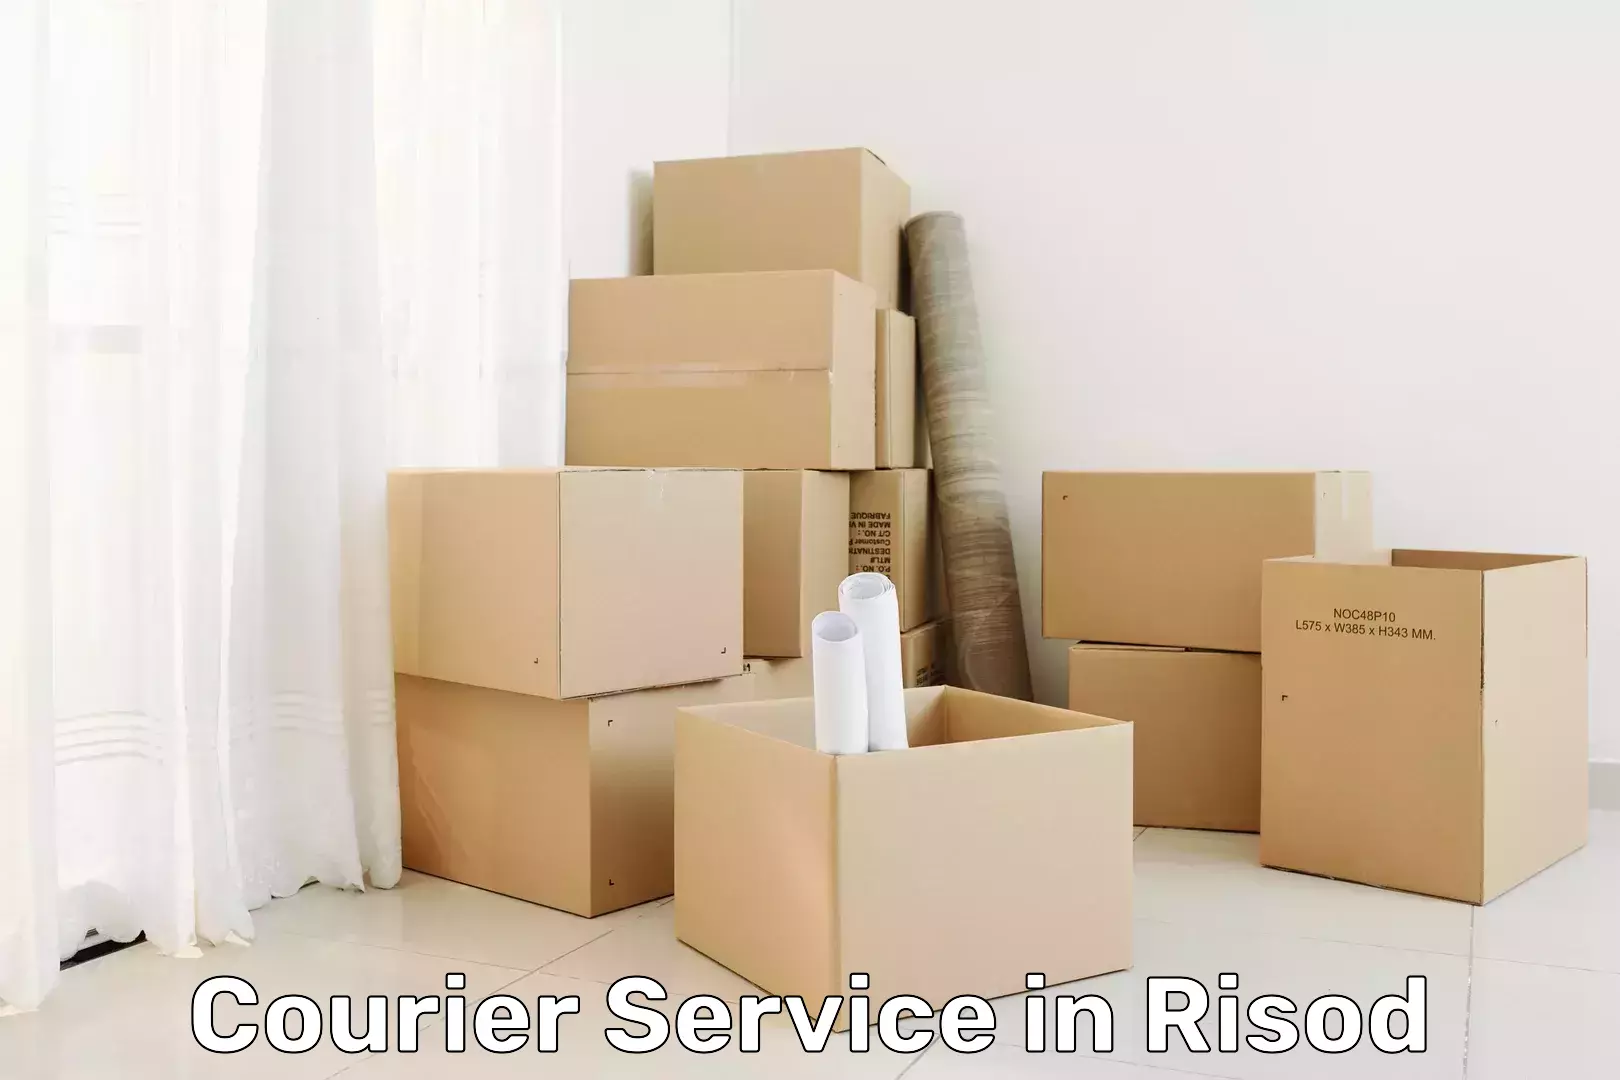 Customer-oriented courier services in Risod